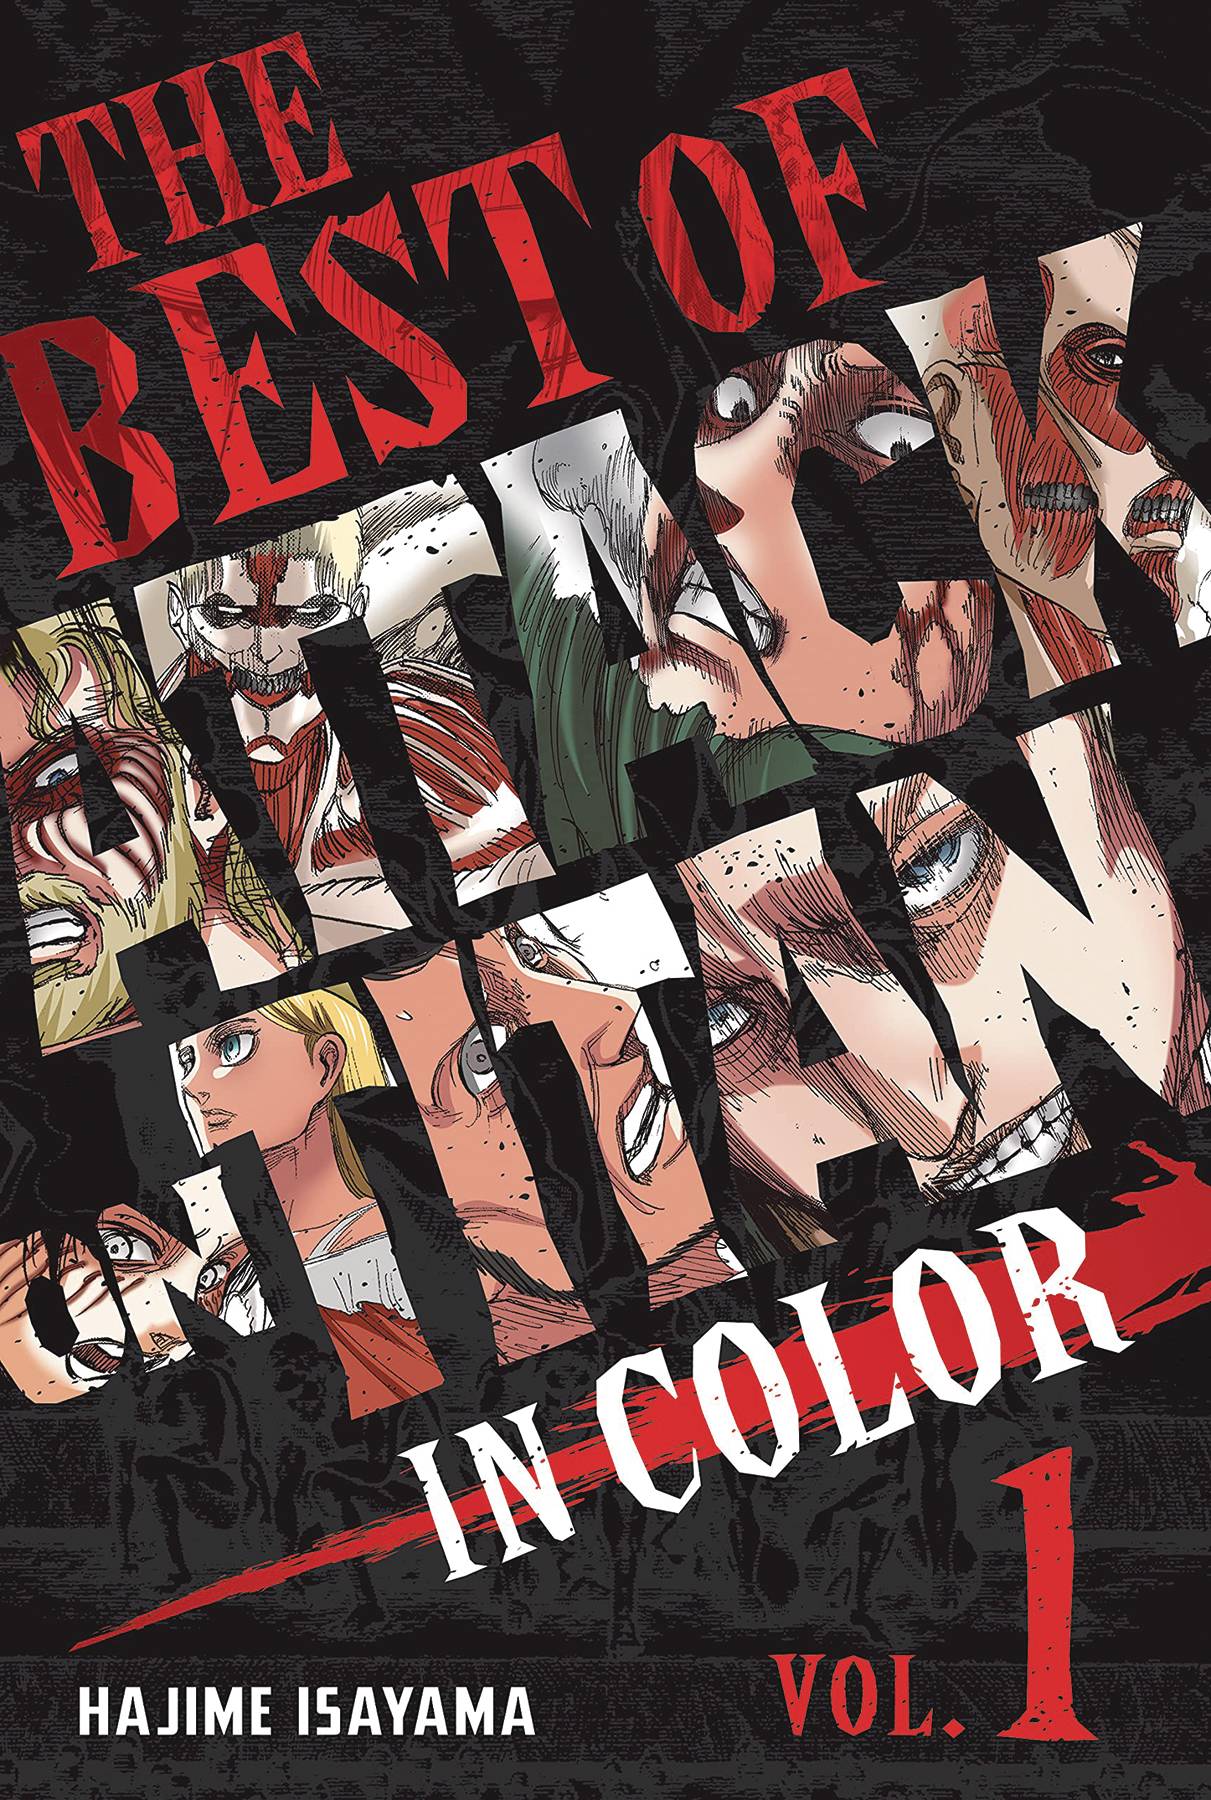 The Best of Attack on Titan: In Color Vol. 1